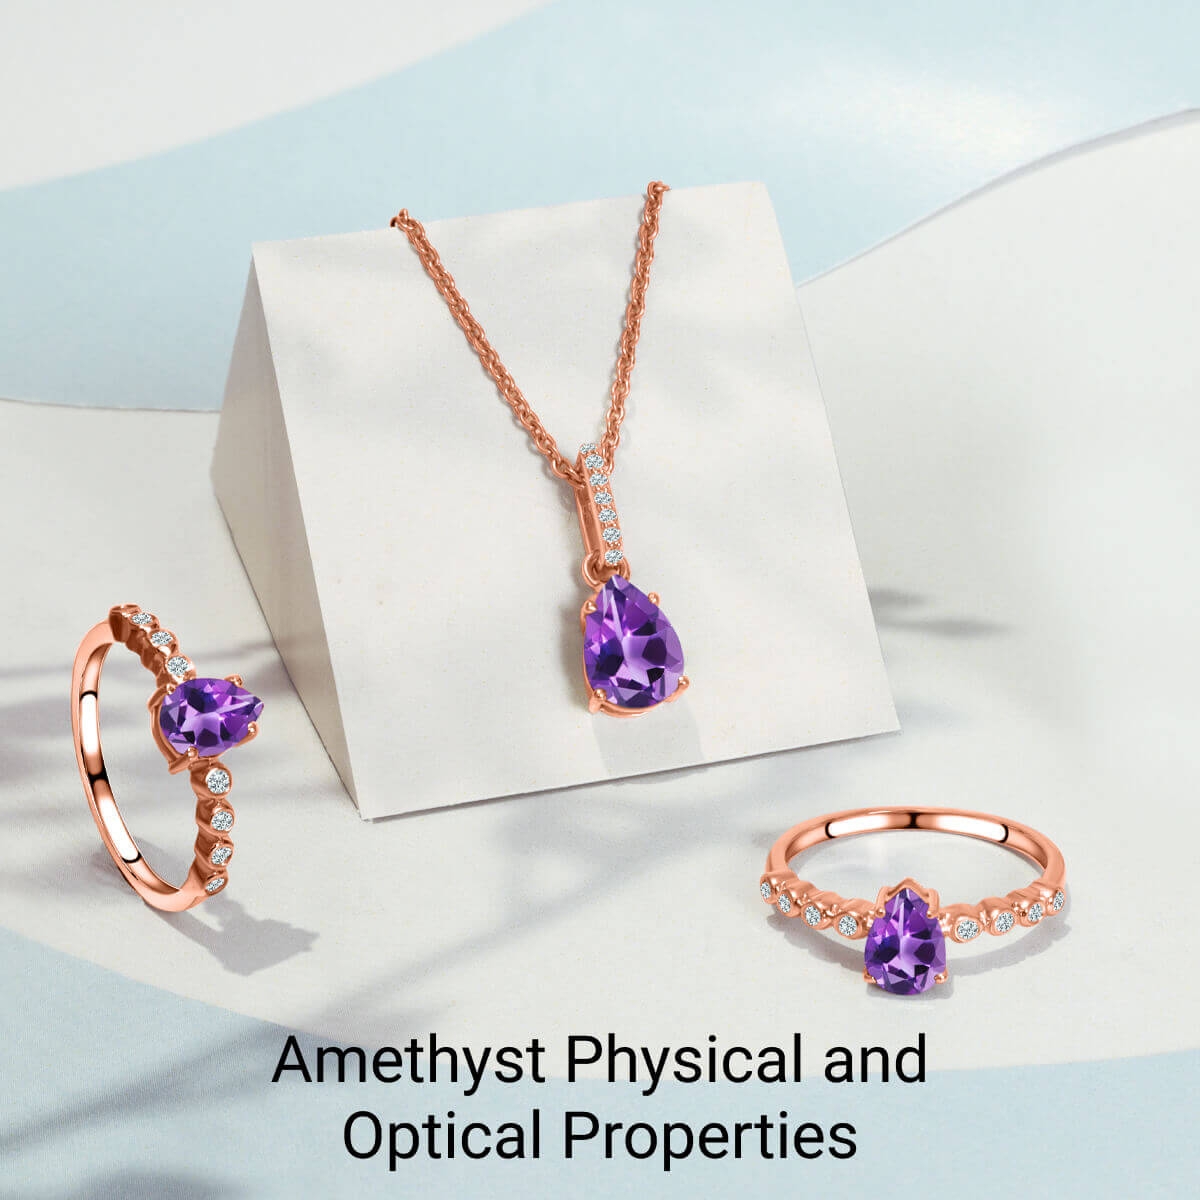 Physical and Optical Properties of Amethyst Gemstones